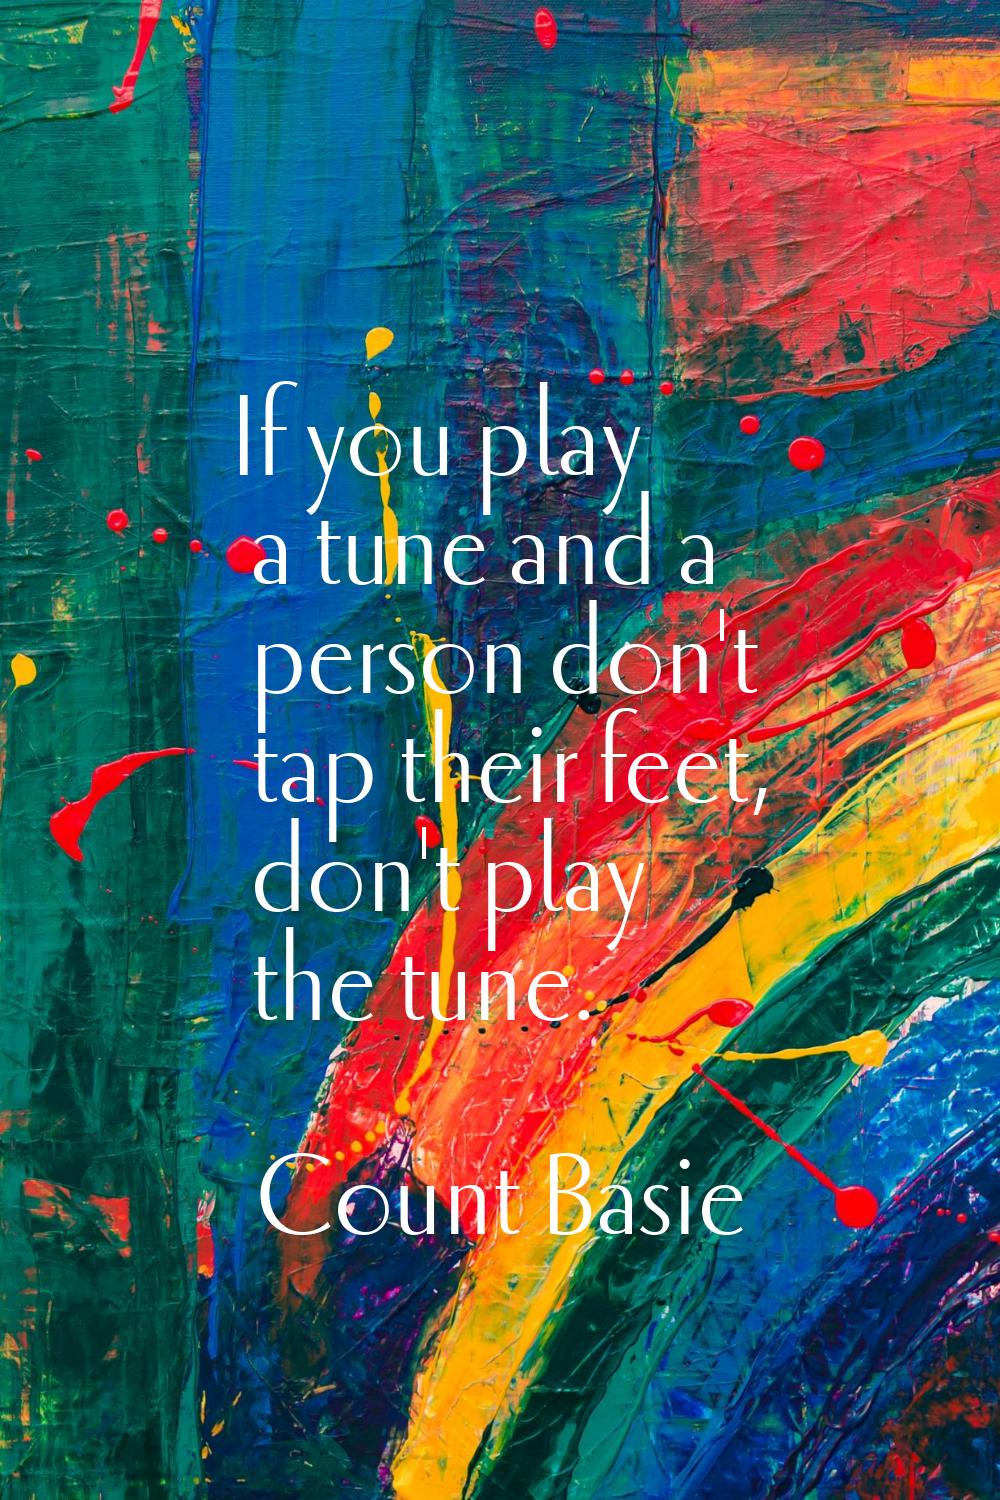 If you play a tune and a person don't tap their feet, don't play the tune.